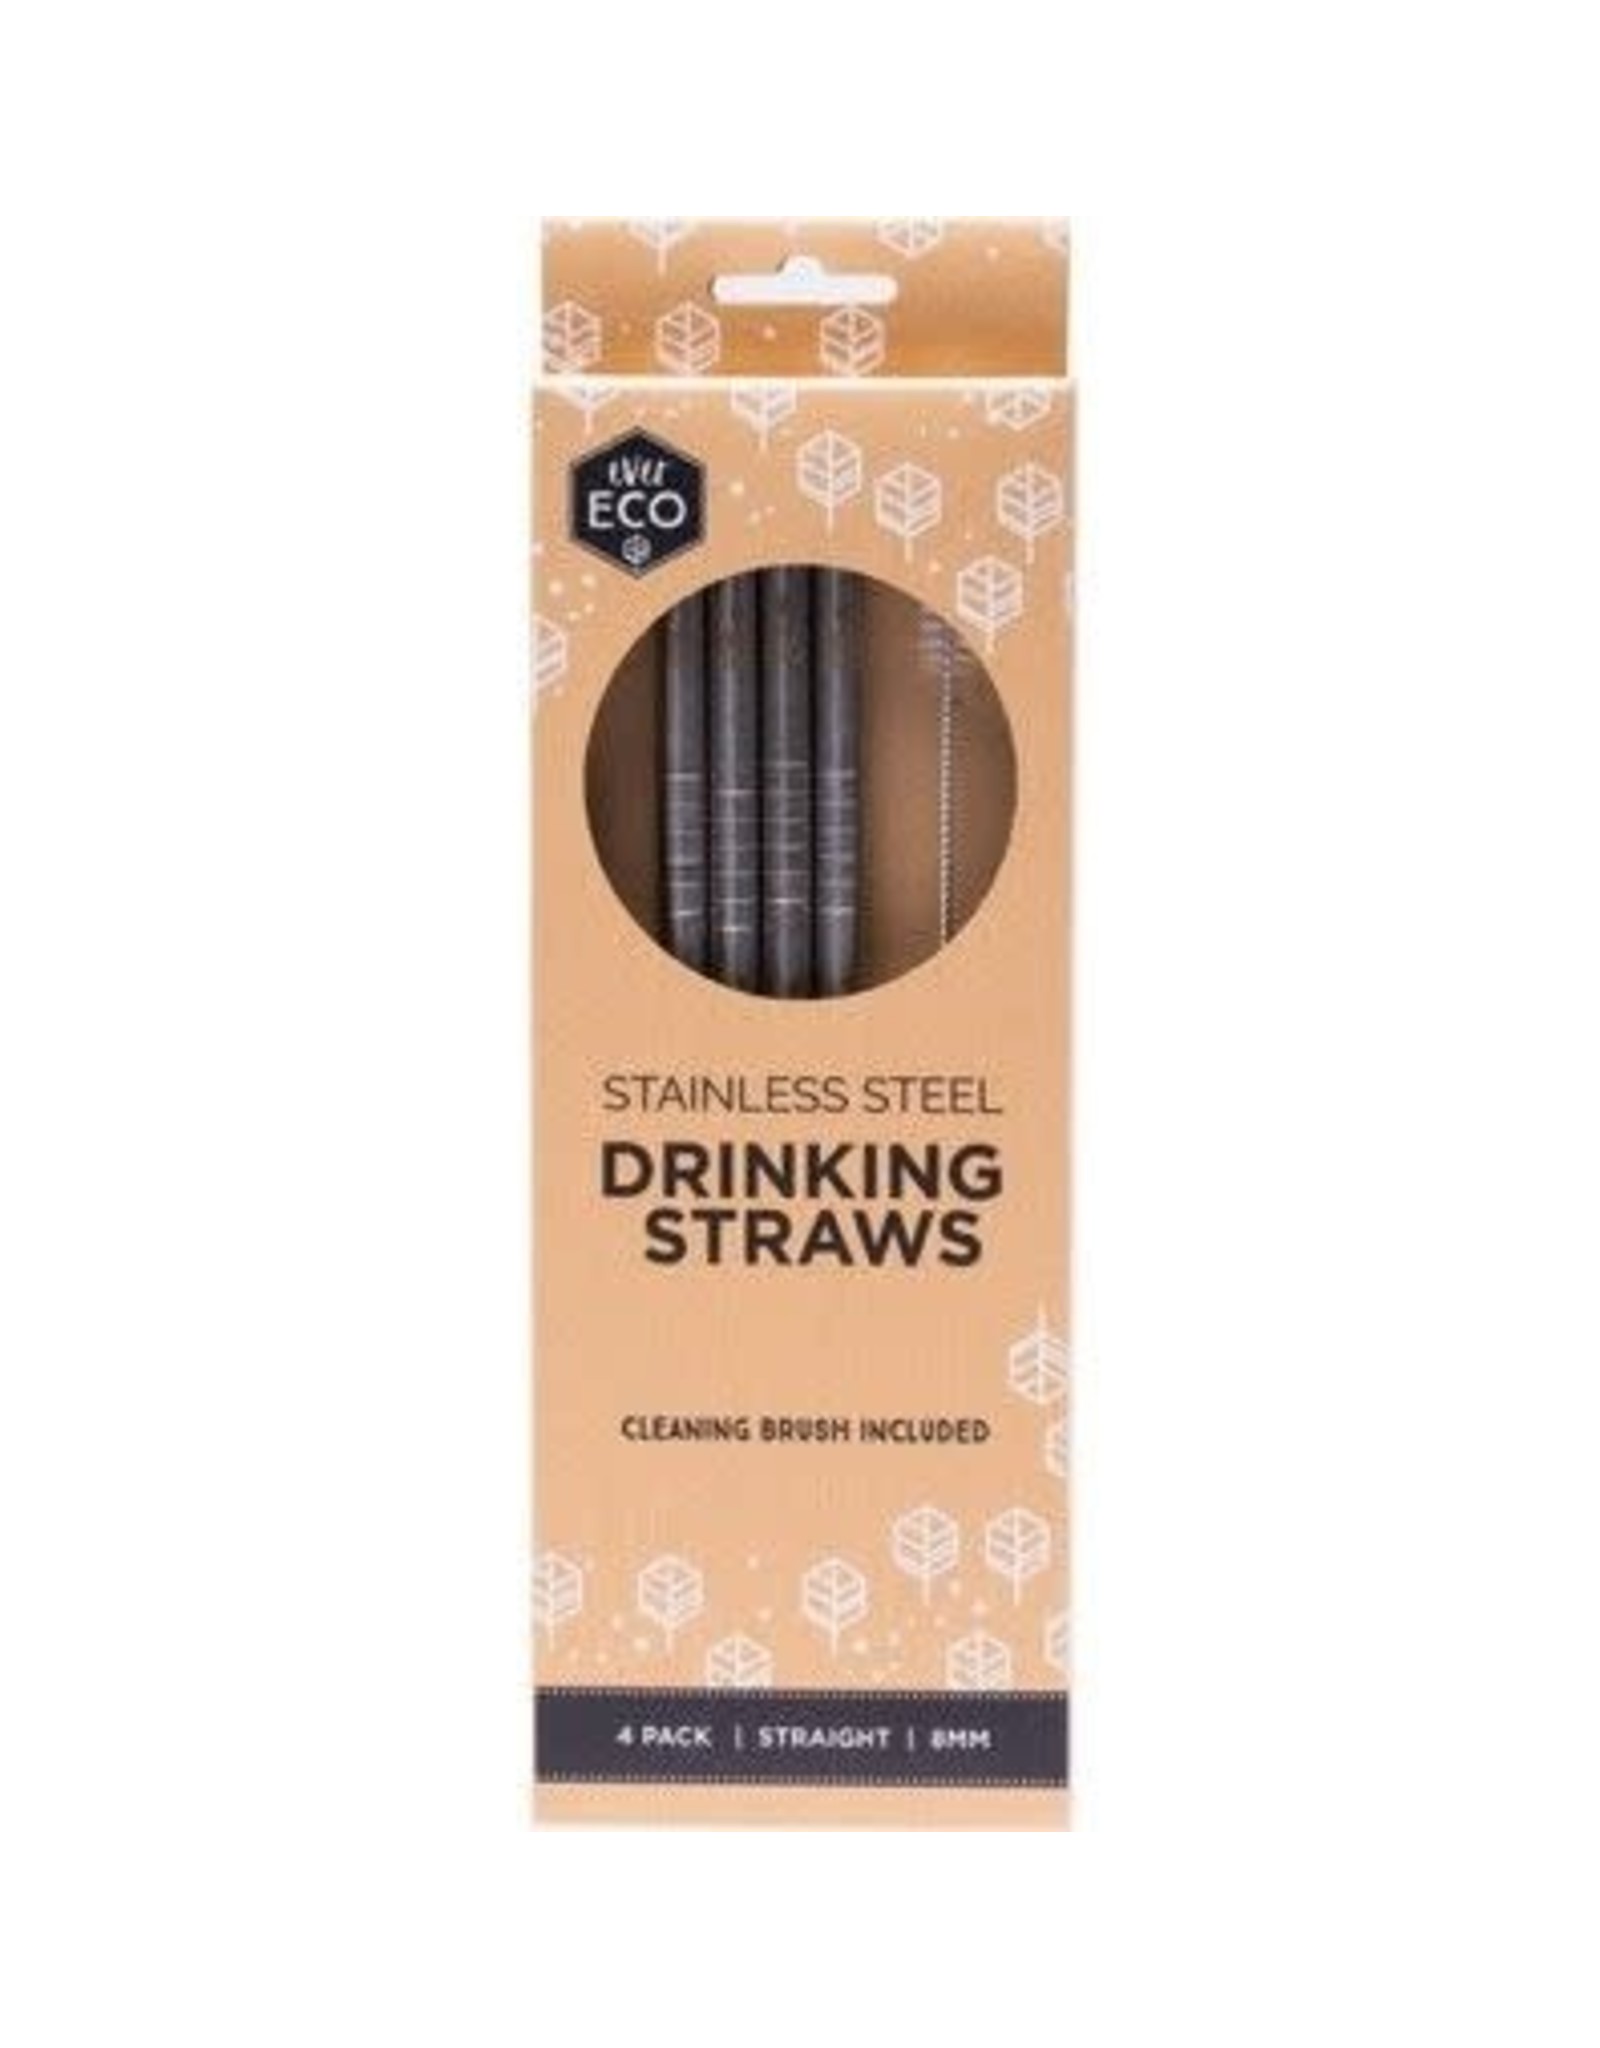 Ever Eco Stainless Steel Drinking Straws Straight 4 Pack